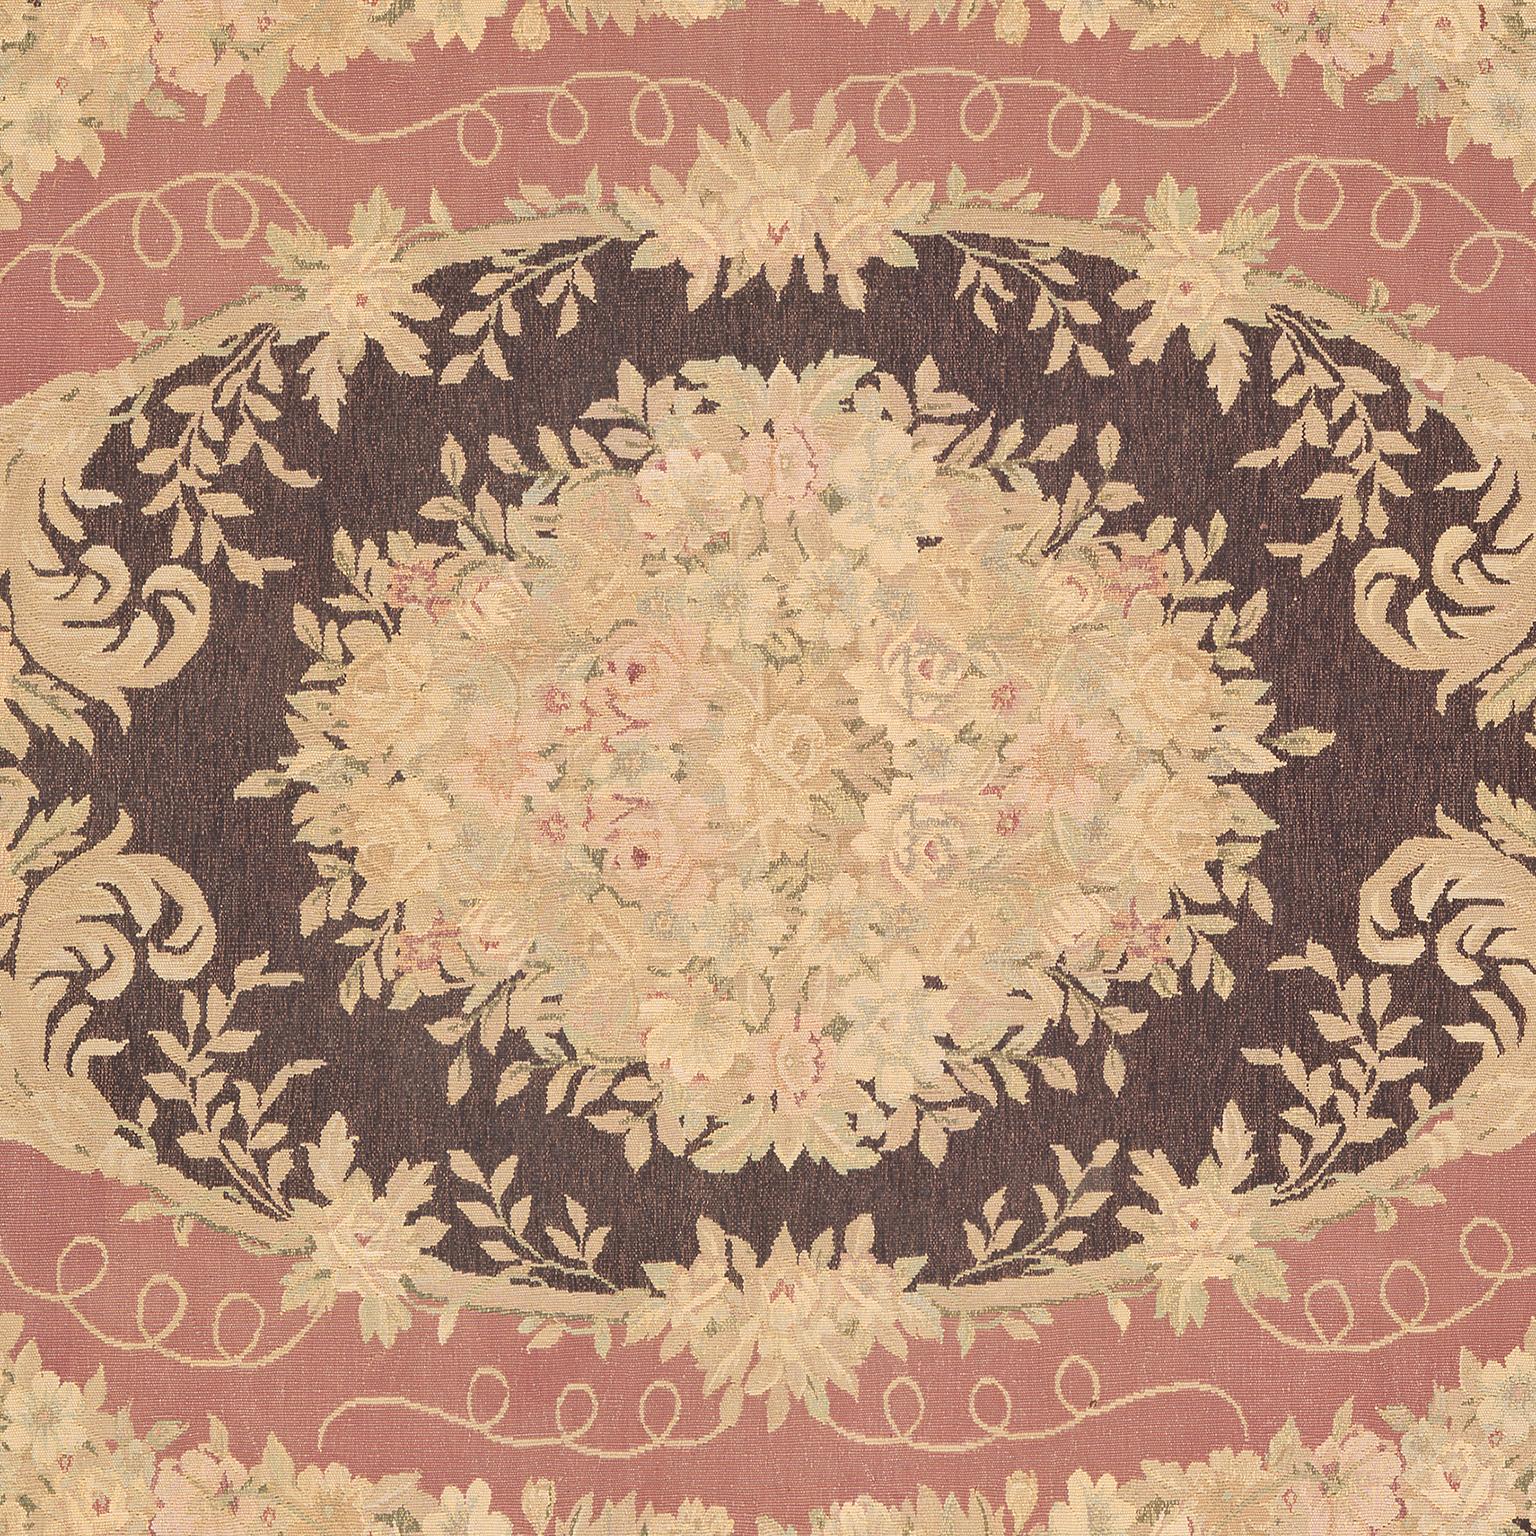 Hand-Woven French Aubusson Carpet, 1920 For Sale